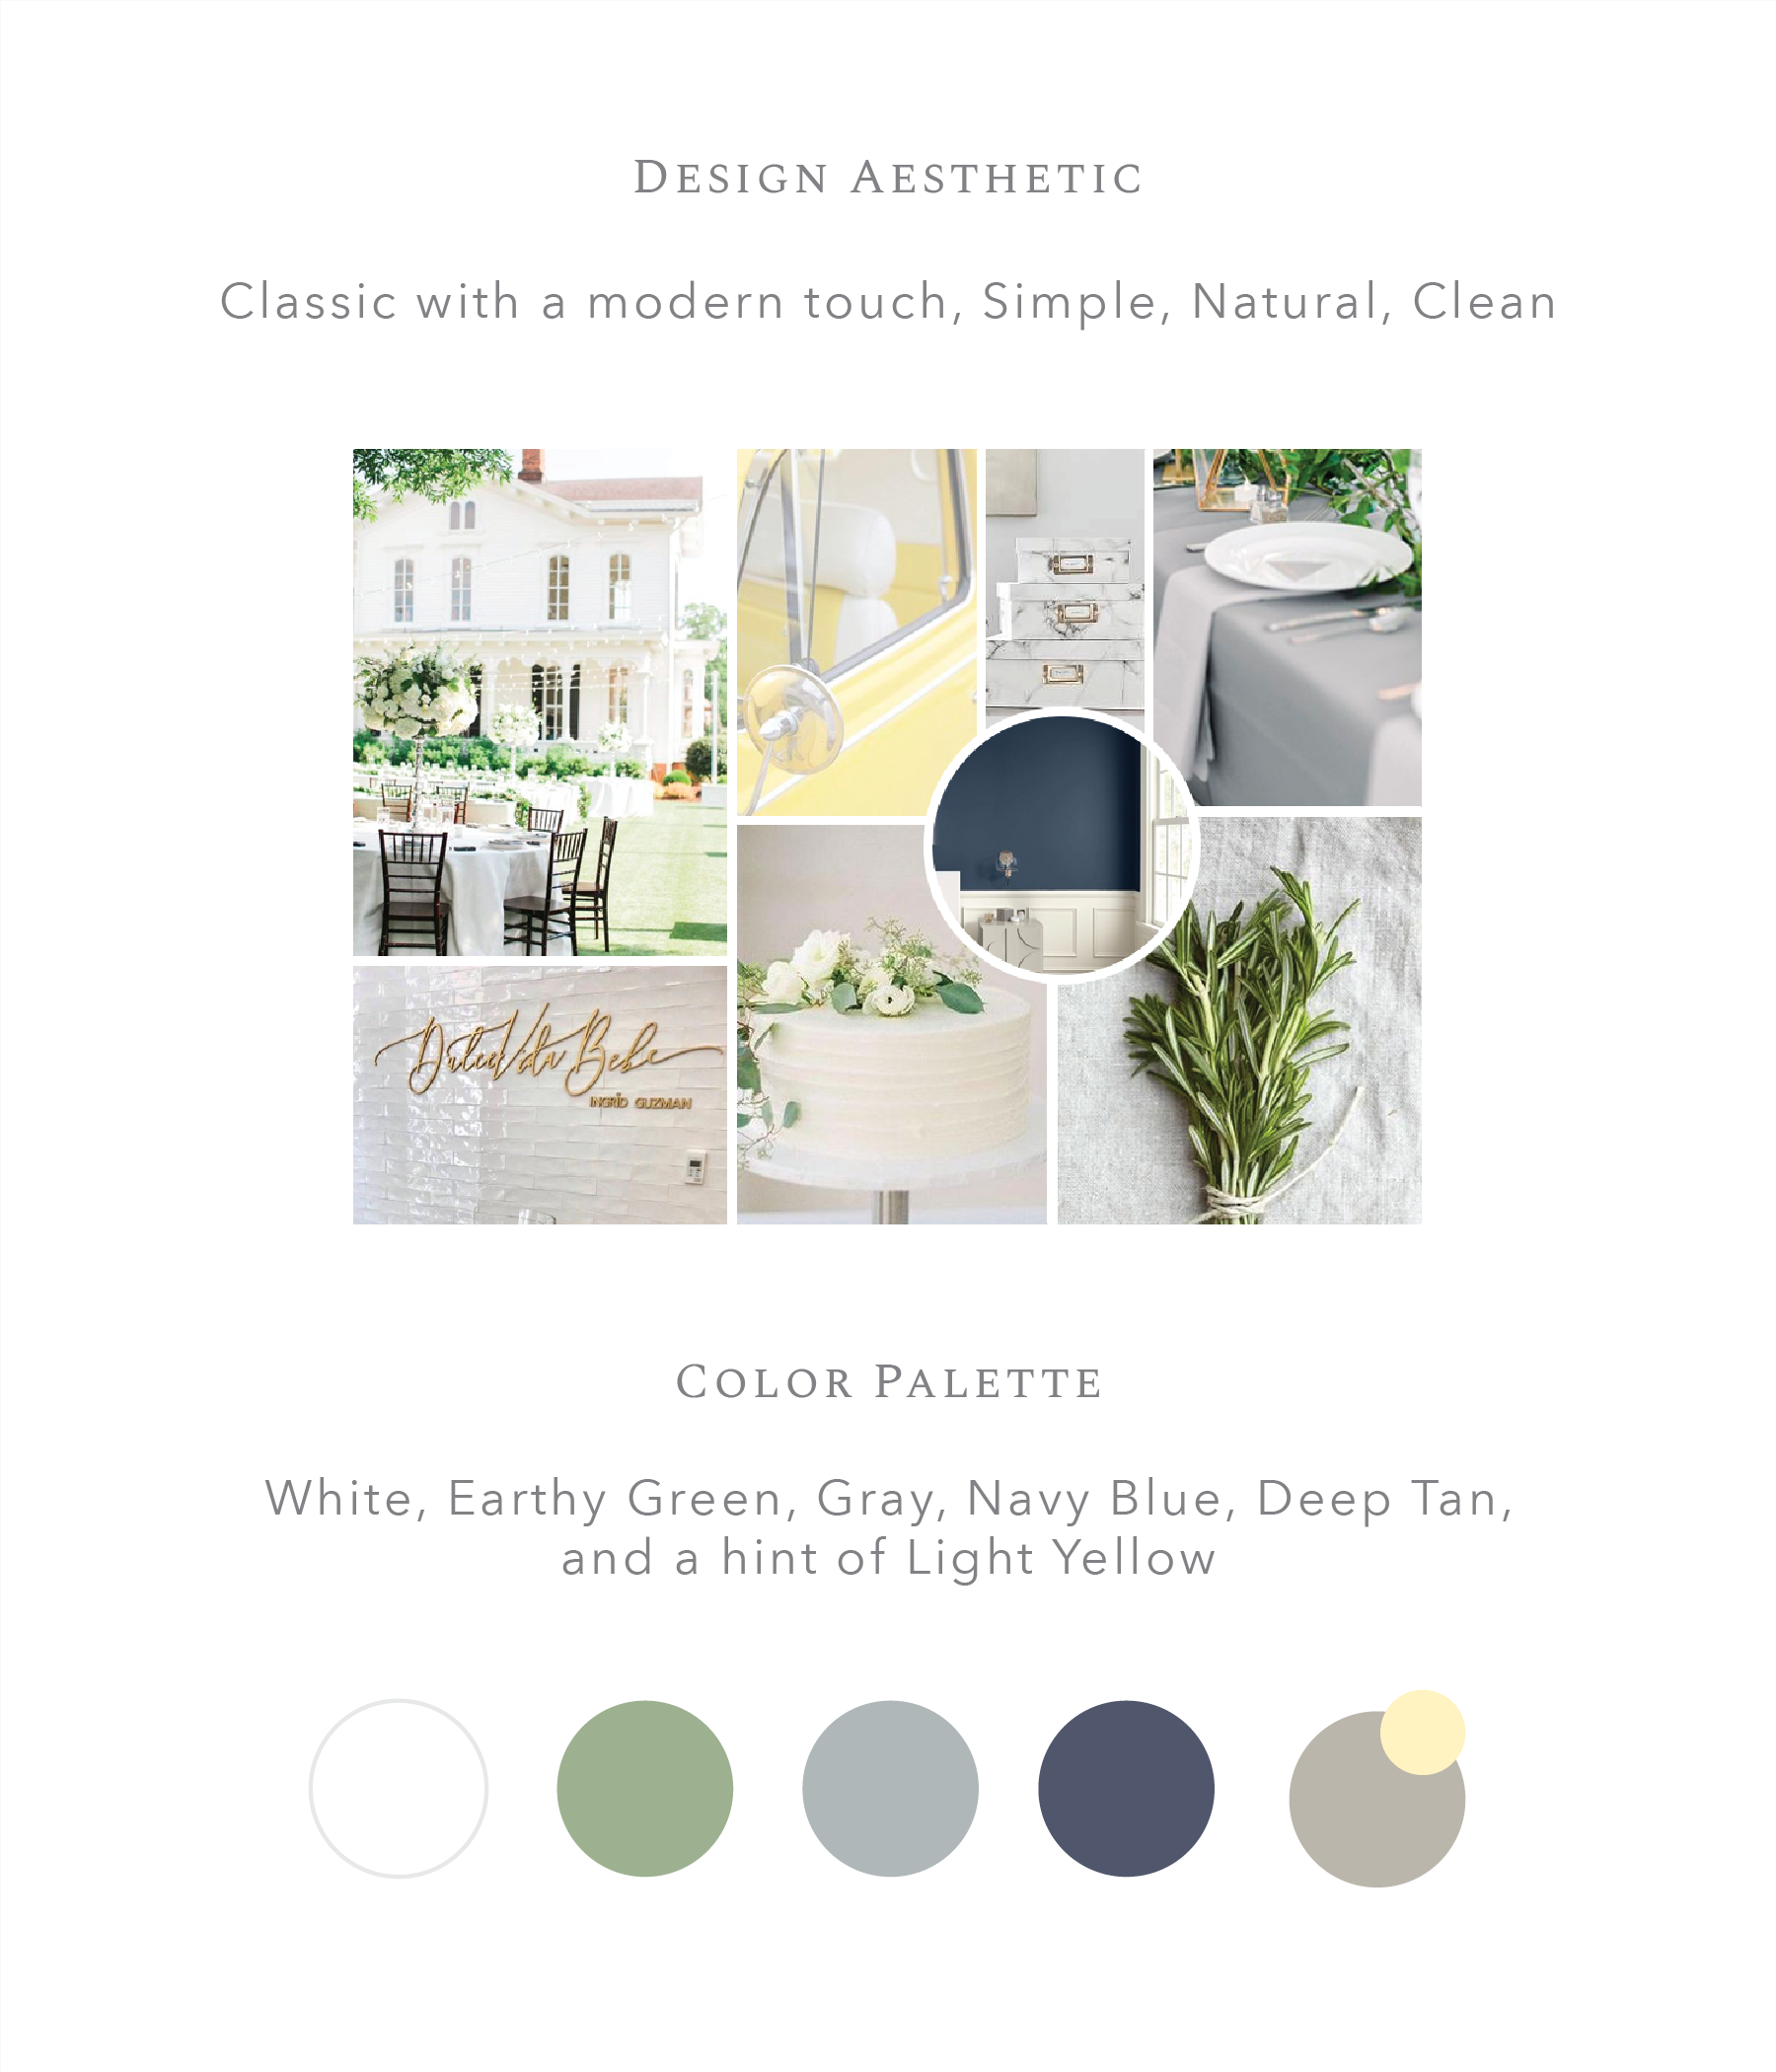 Lookbook Template - Cohn-Still_Design Aesthetic and Color Palette.png